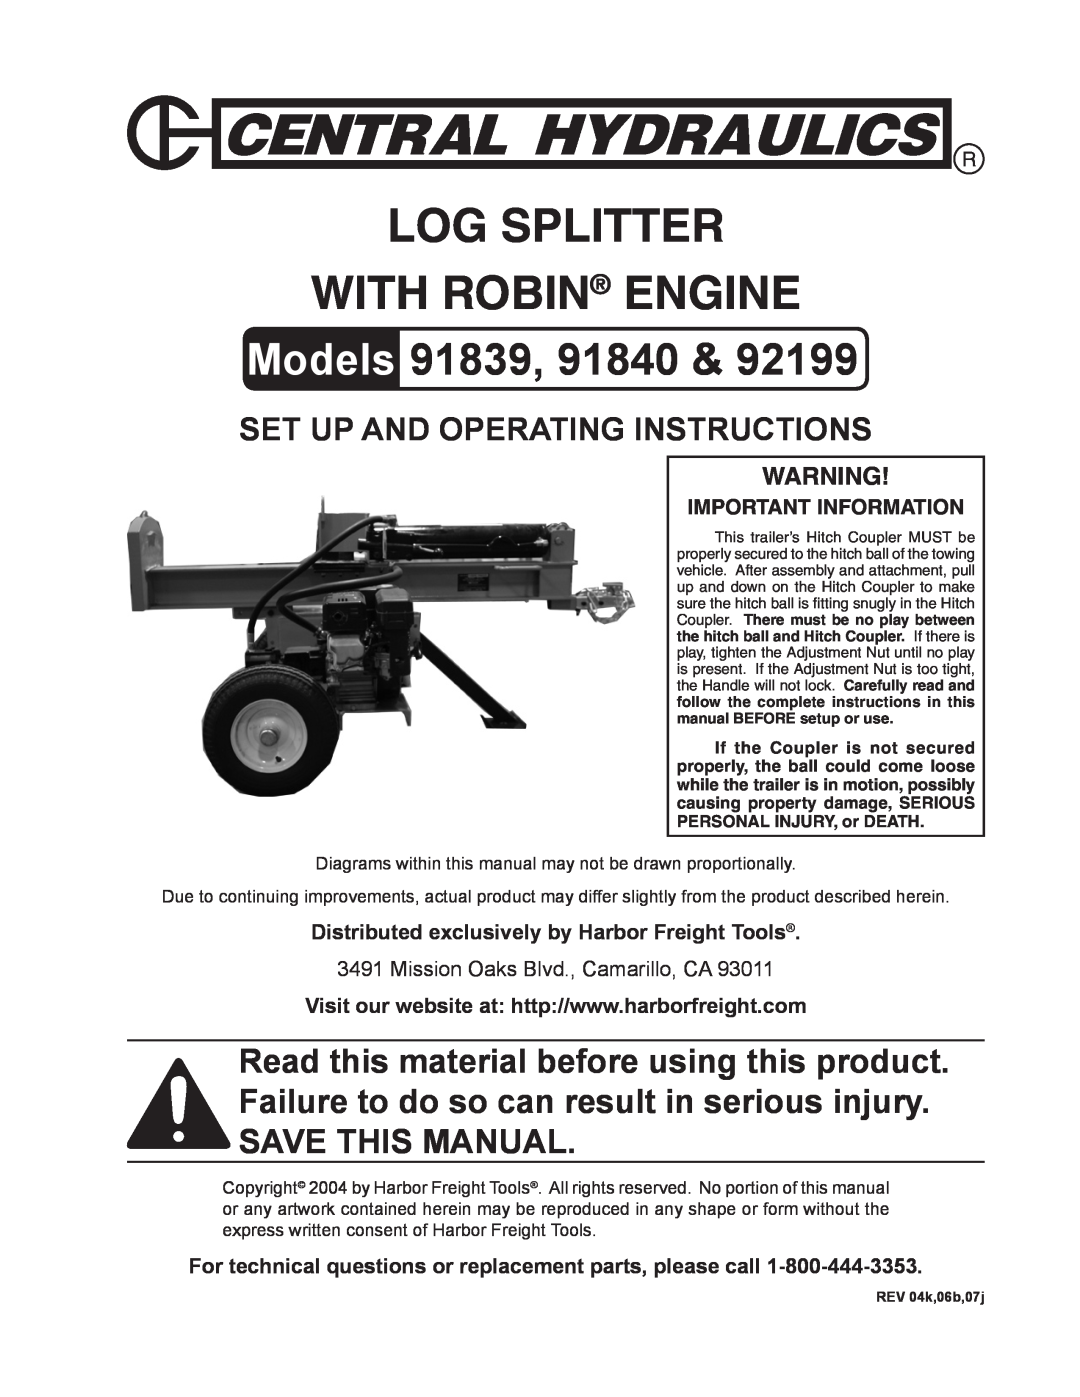 Harbor Freight Tools 92199 manual Log Splitter With Robin Engine, Models 91839, 91840, Set up And Operating Instructions 